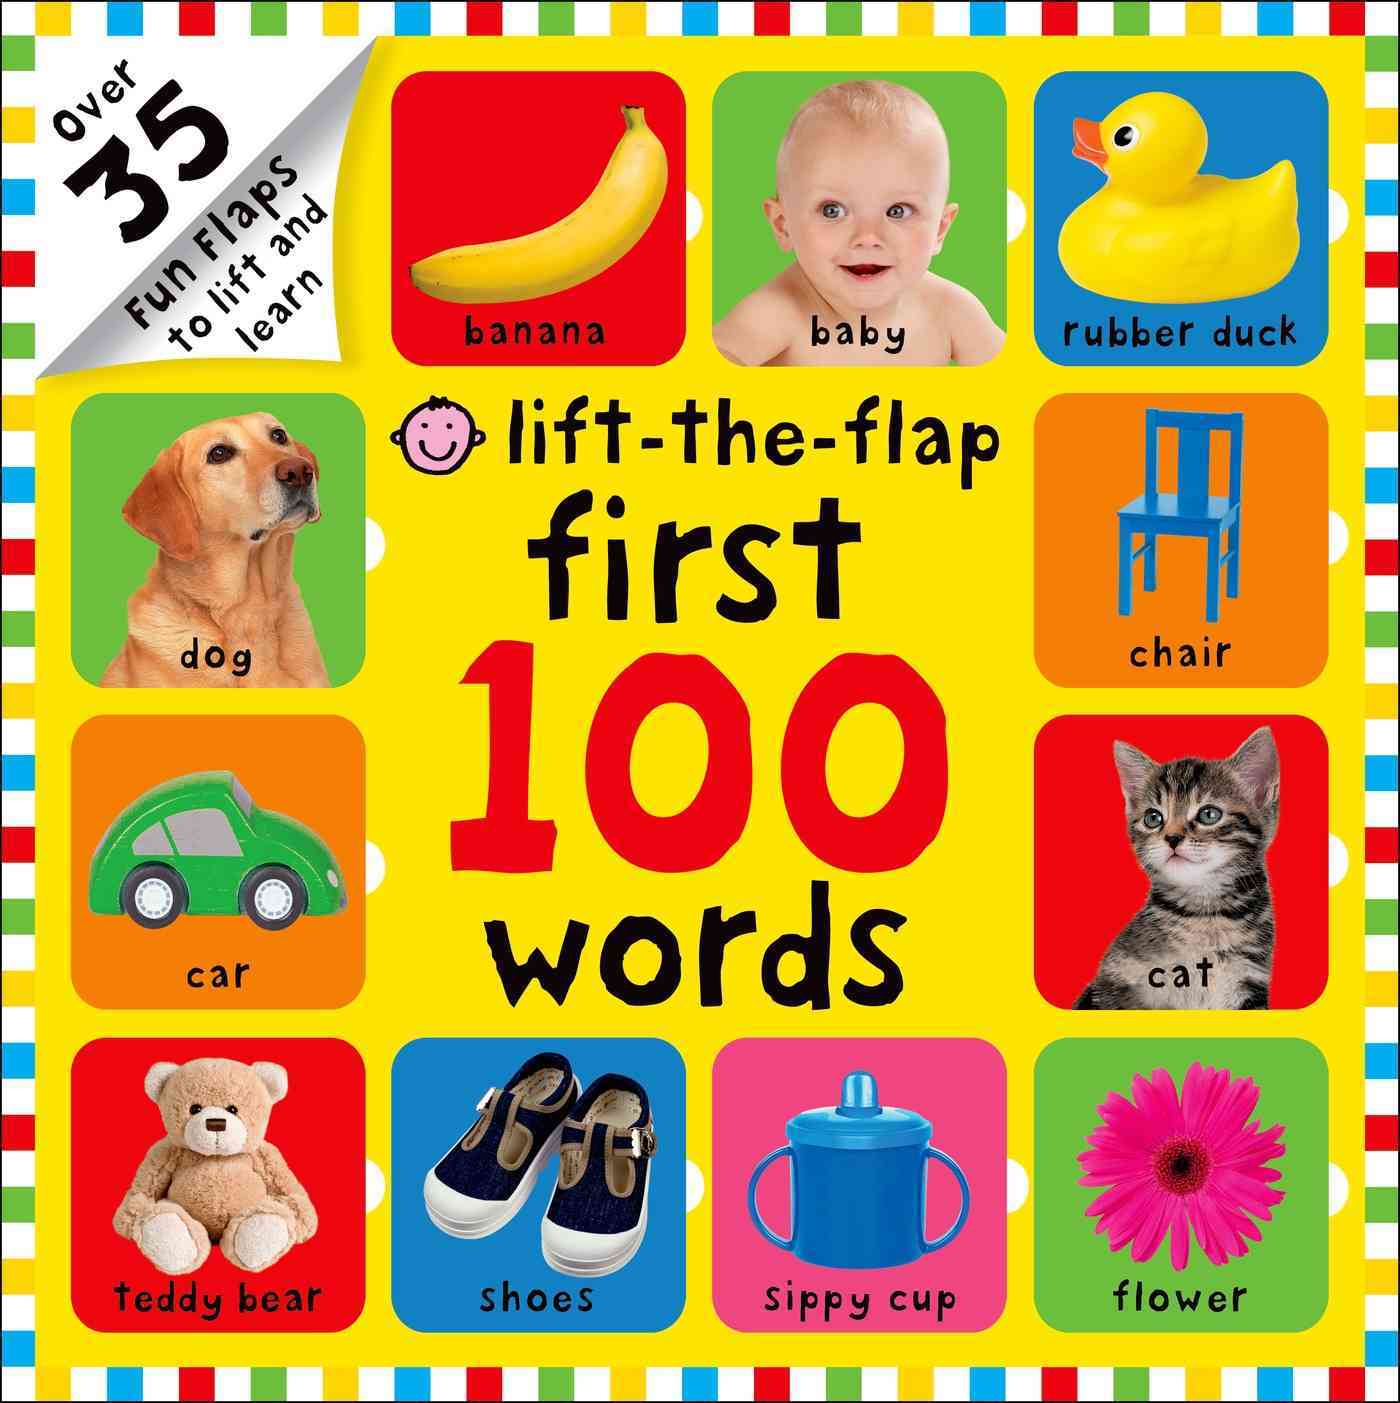 Lift-the-Flap First 100 Words by John Schindel and Jonathan Chester